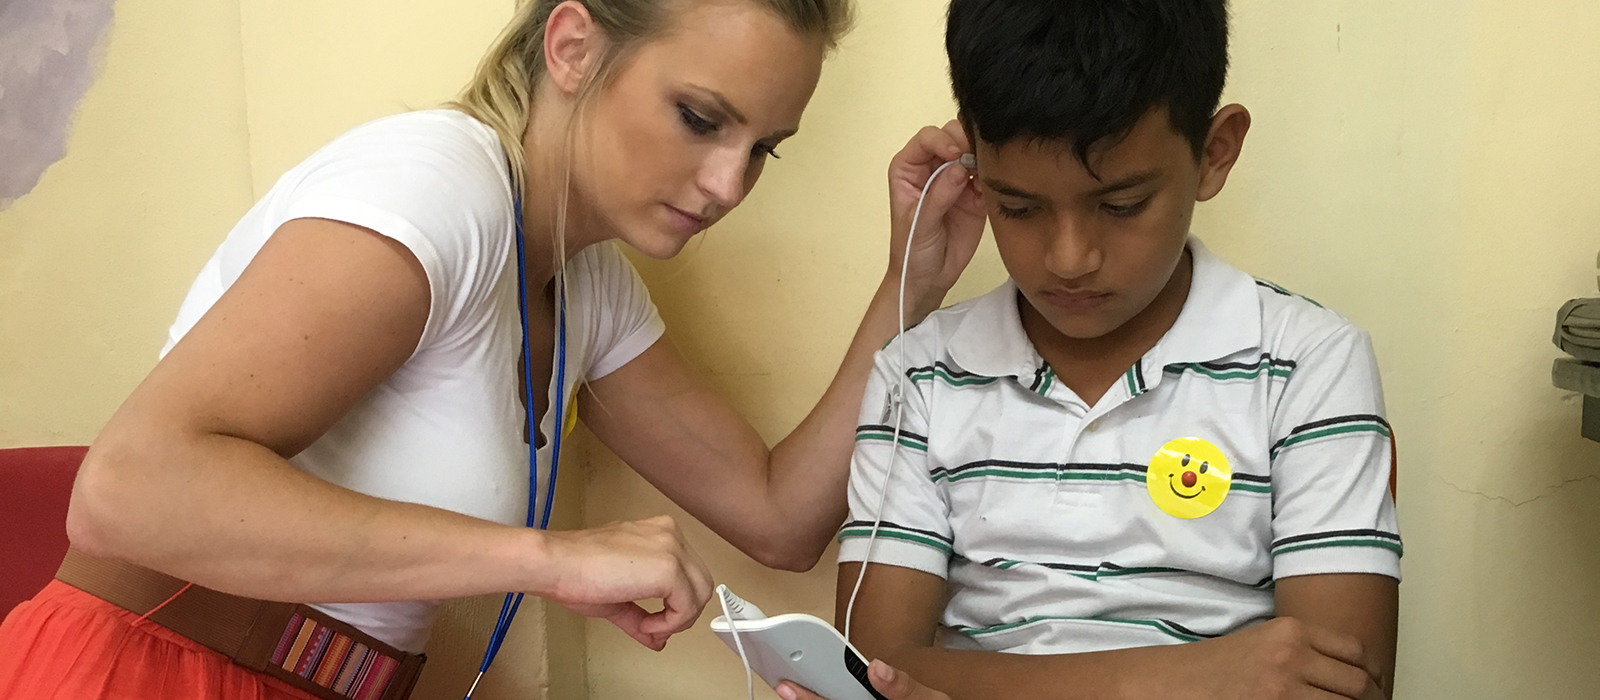 a Husker student conducts a hearing evaluation on a young boy in Nicaragua